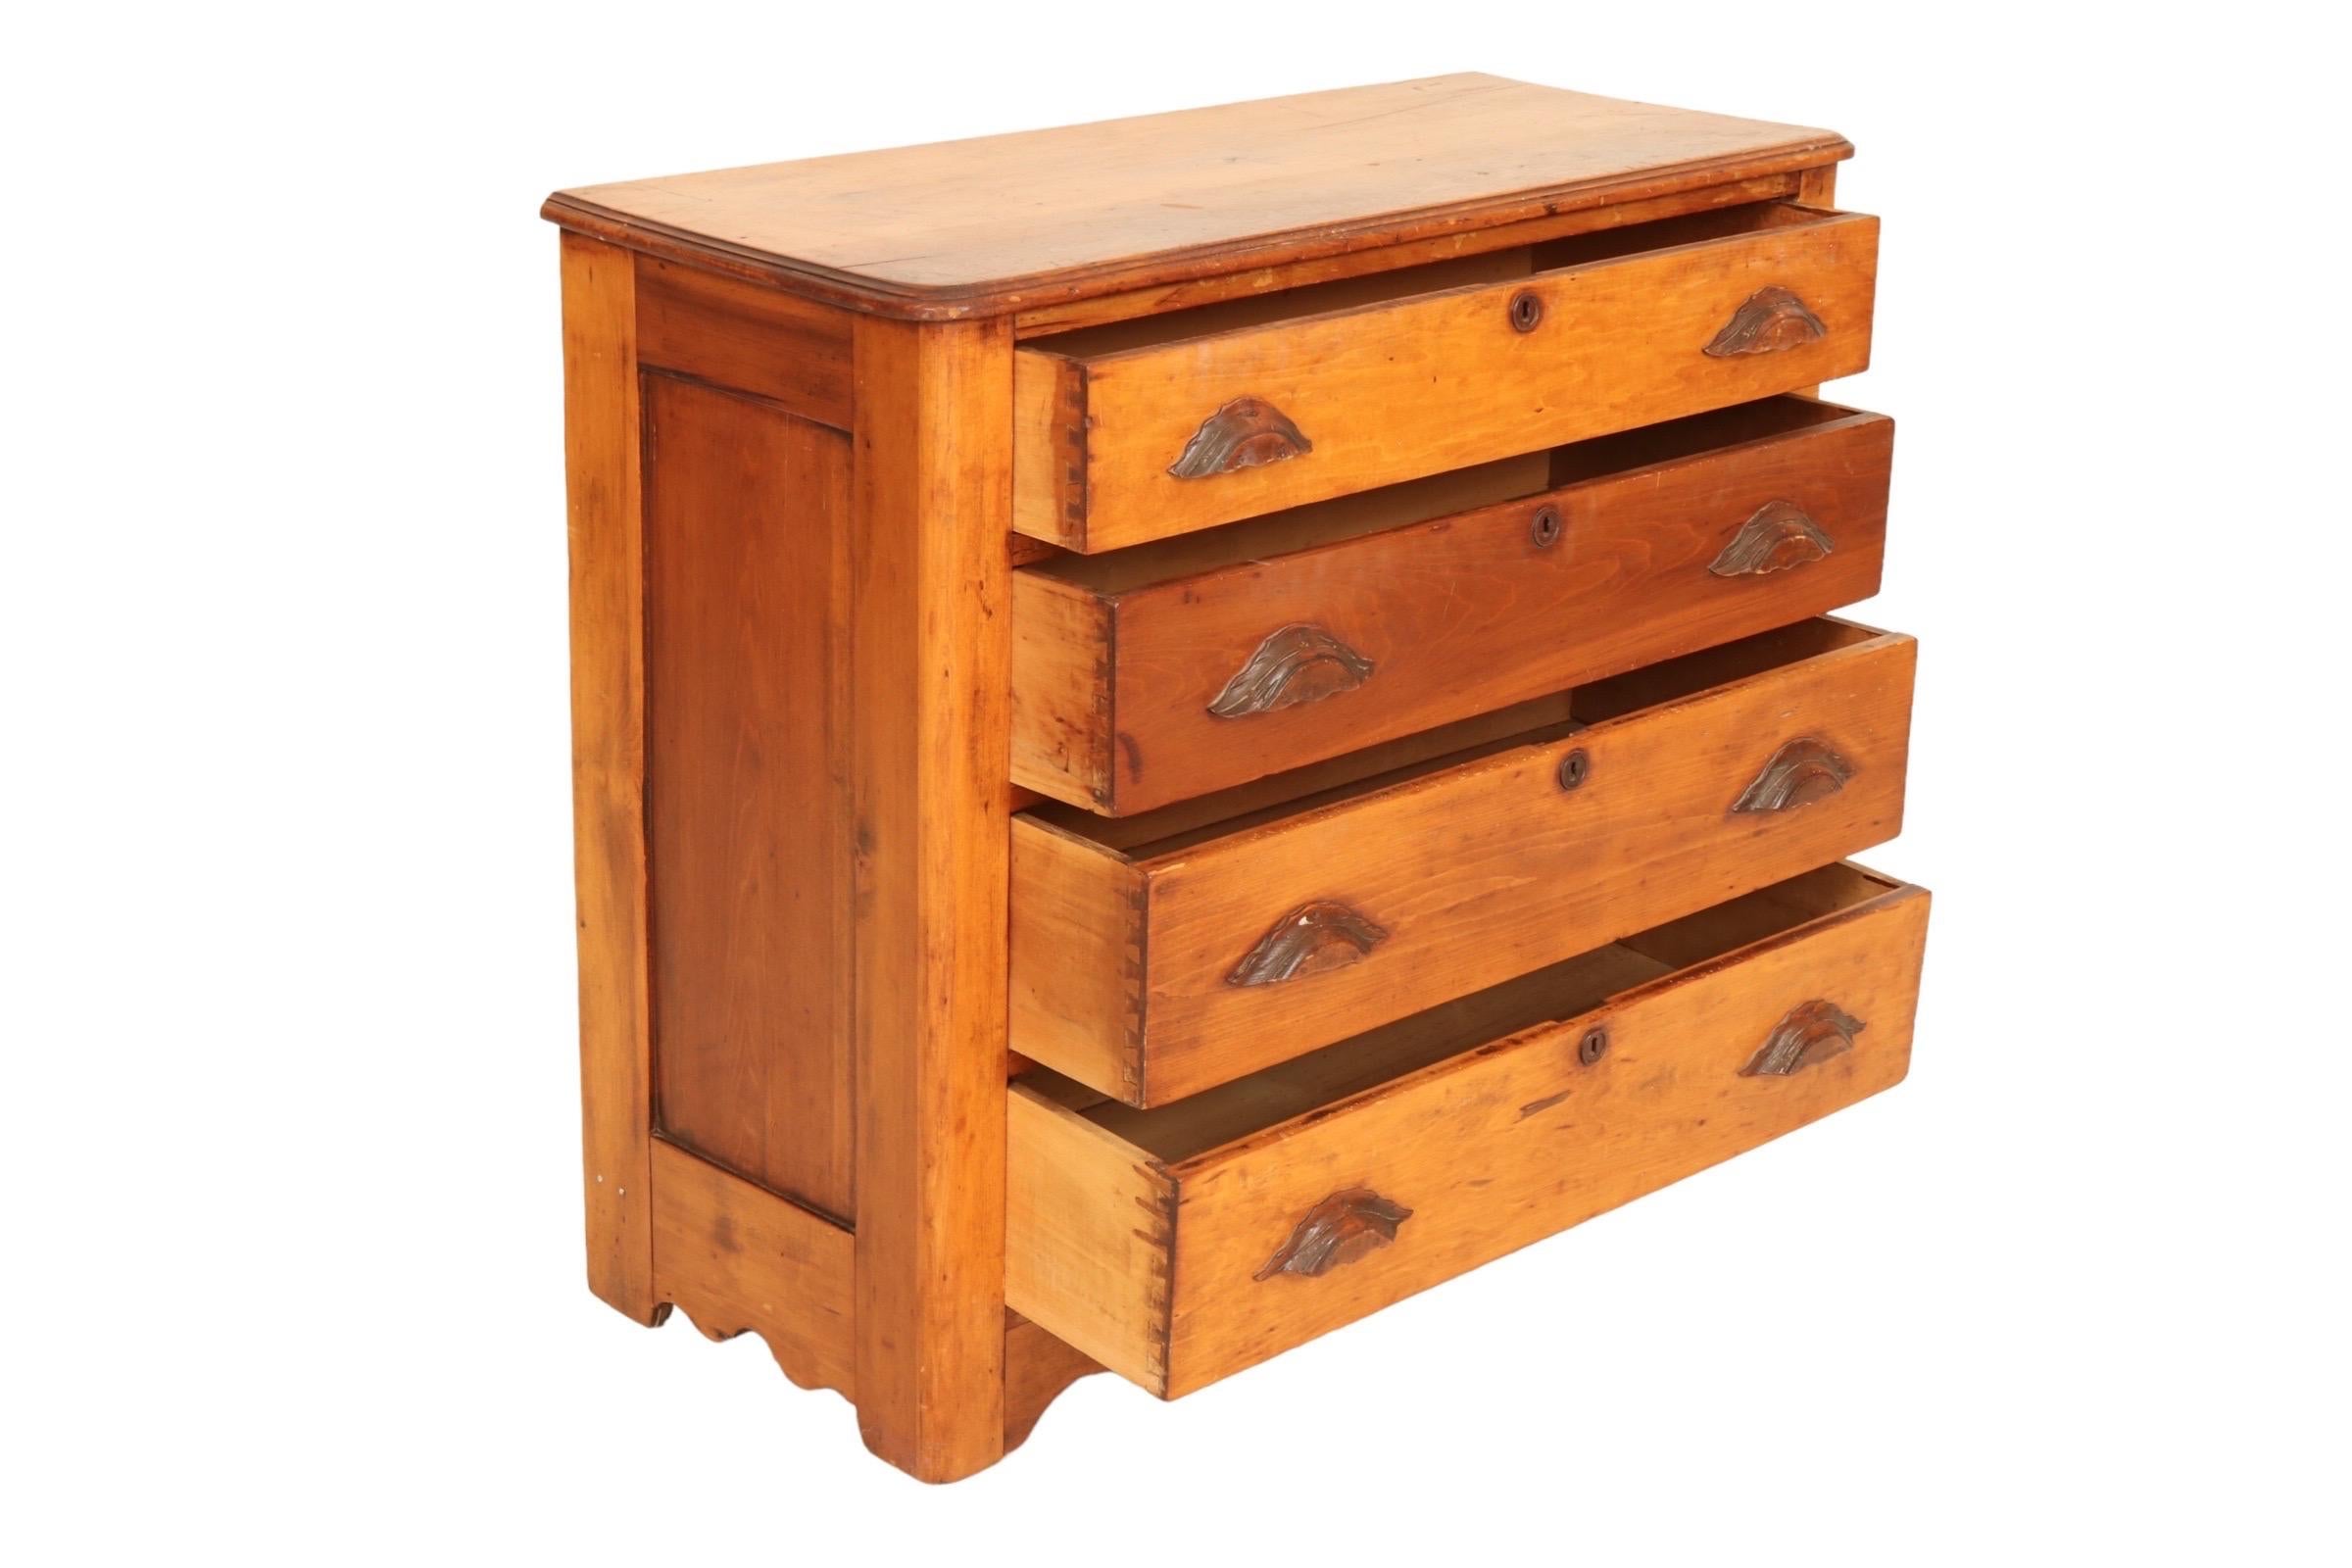 An antique provincial style cherry wood chest of drawers made by cabinet maker Samuel Harper (1818-1904) of Cooperstown, Otsego County, New York. Four hand dovetailed drawers open with decorative carved wood half-moon pull handles. The serpentine